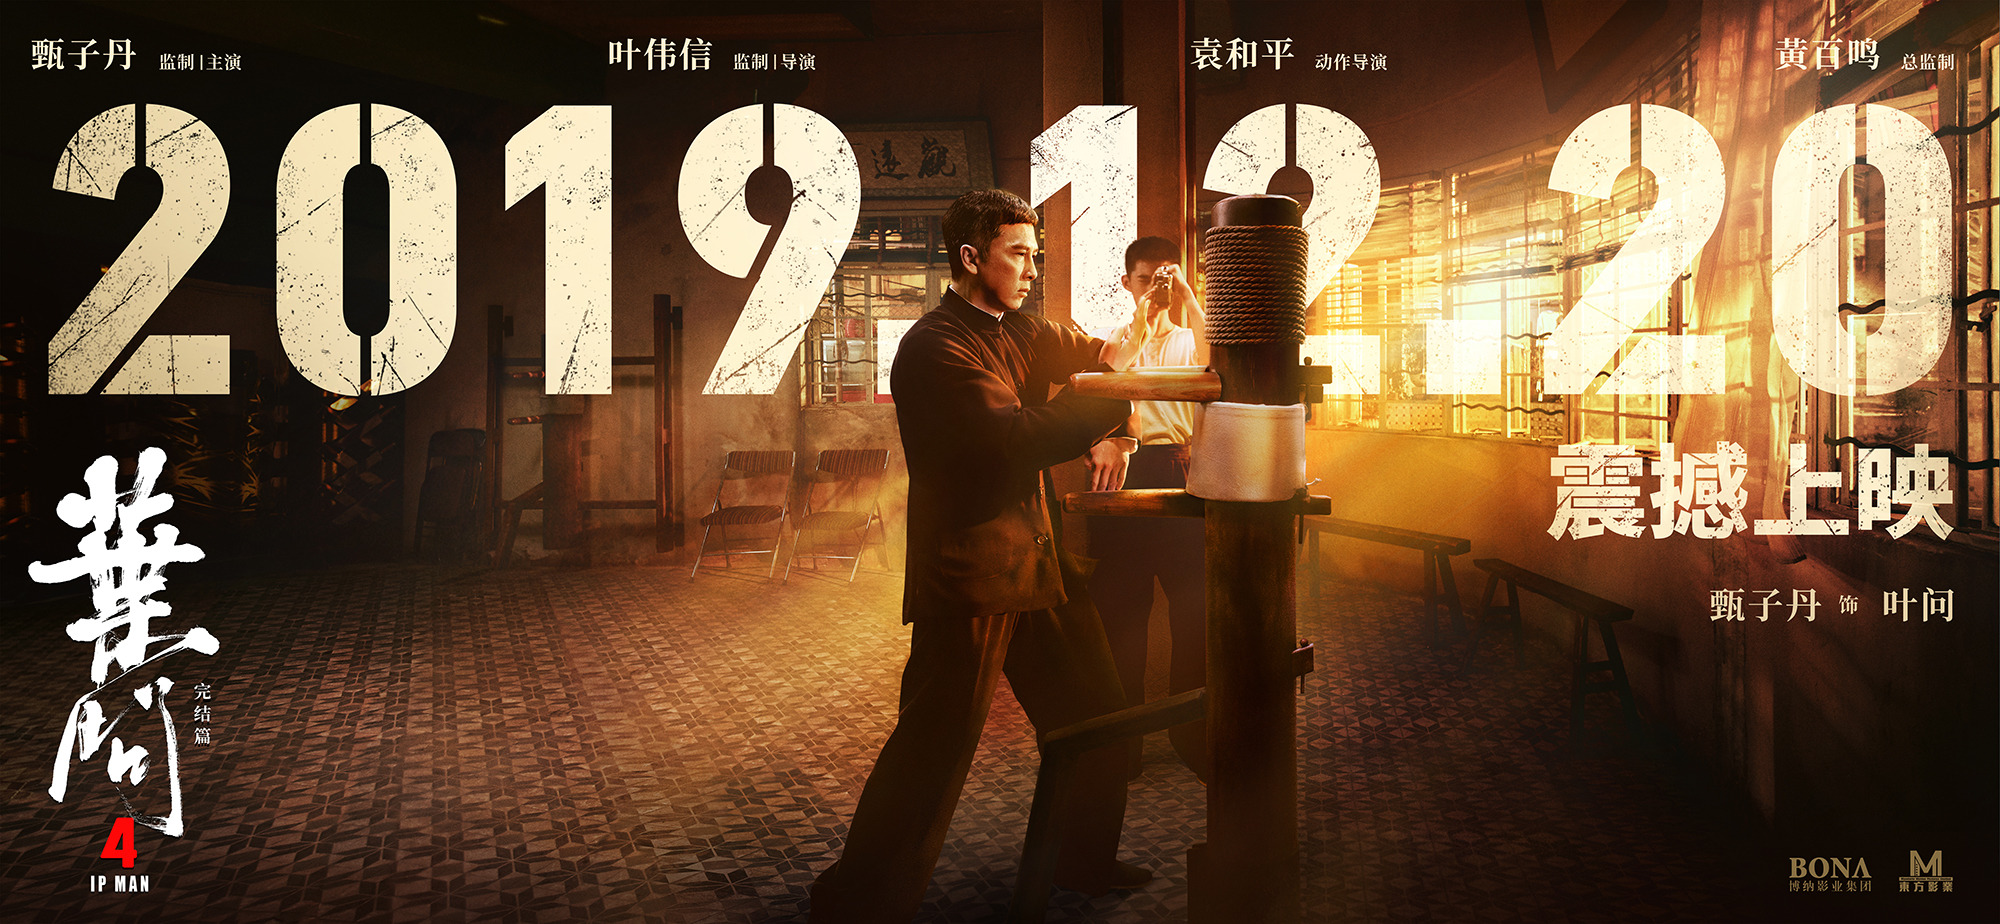 Mega Sized Movie Poster Image for Yip Man 4 (#7 of 15)